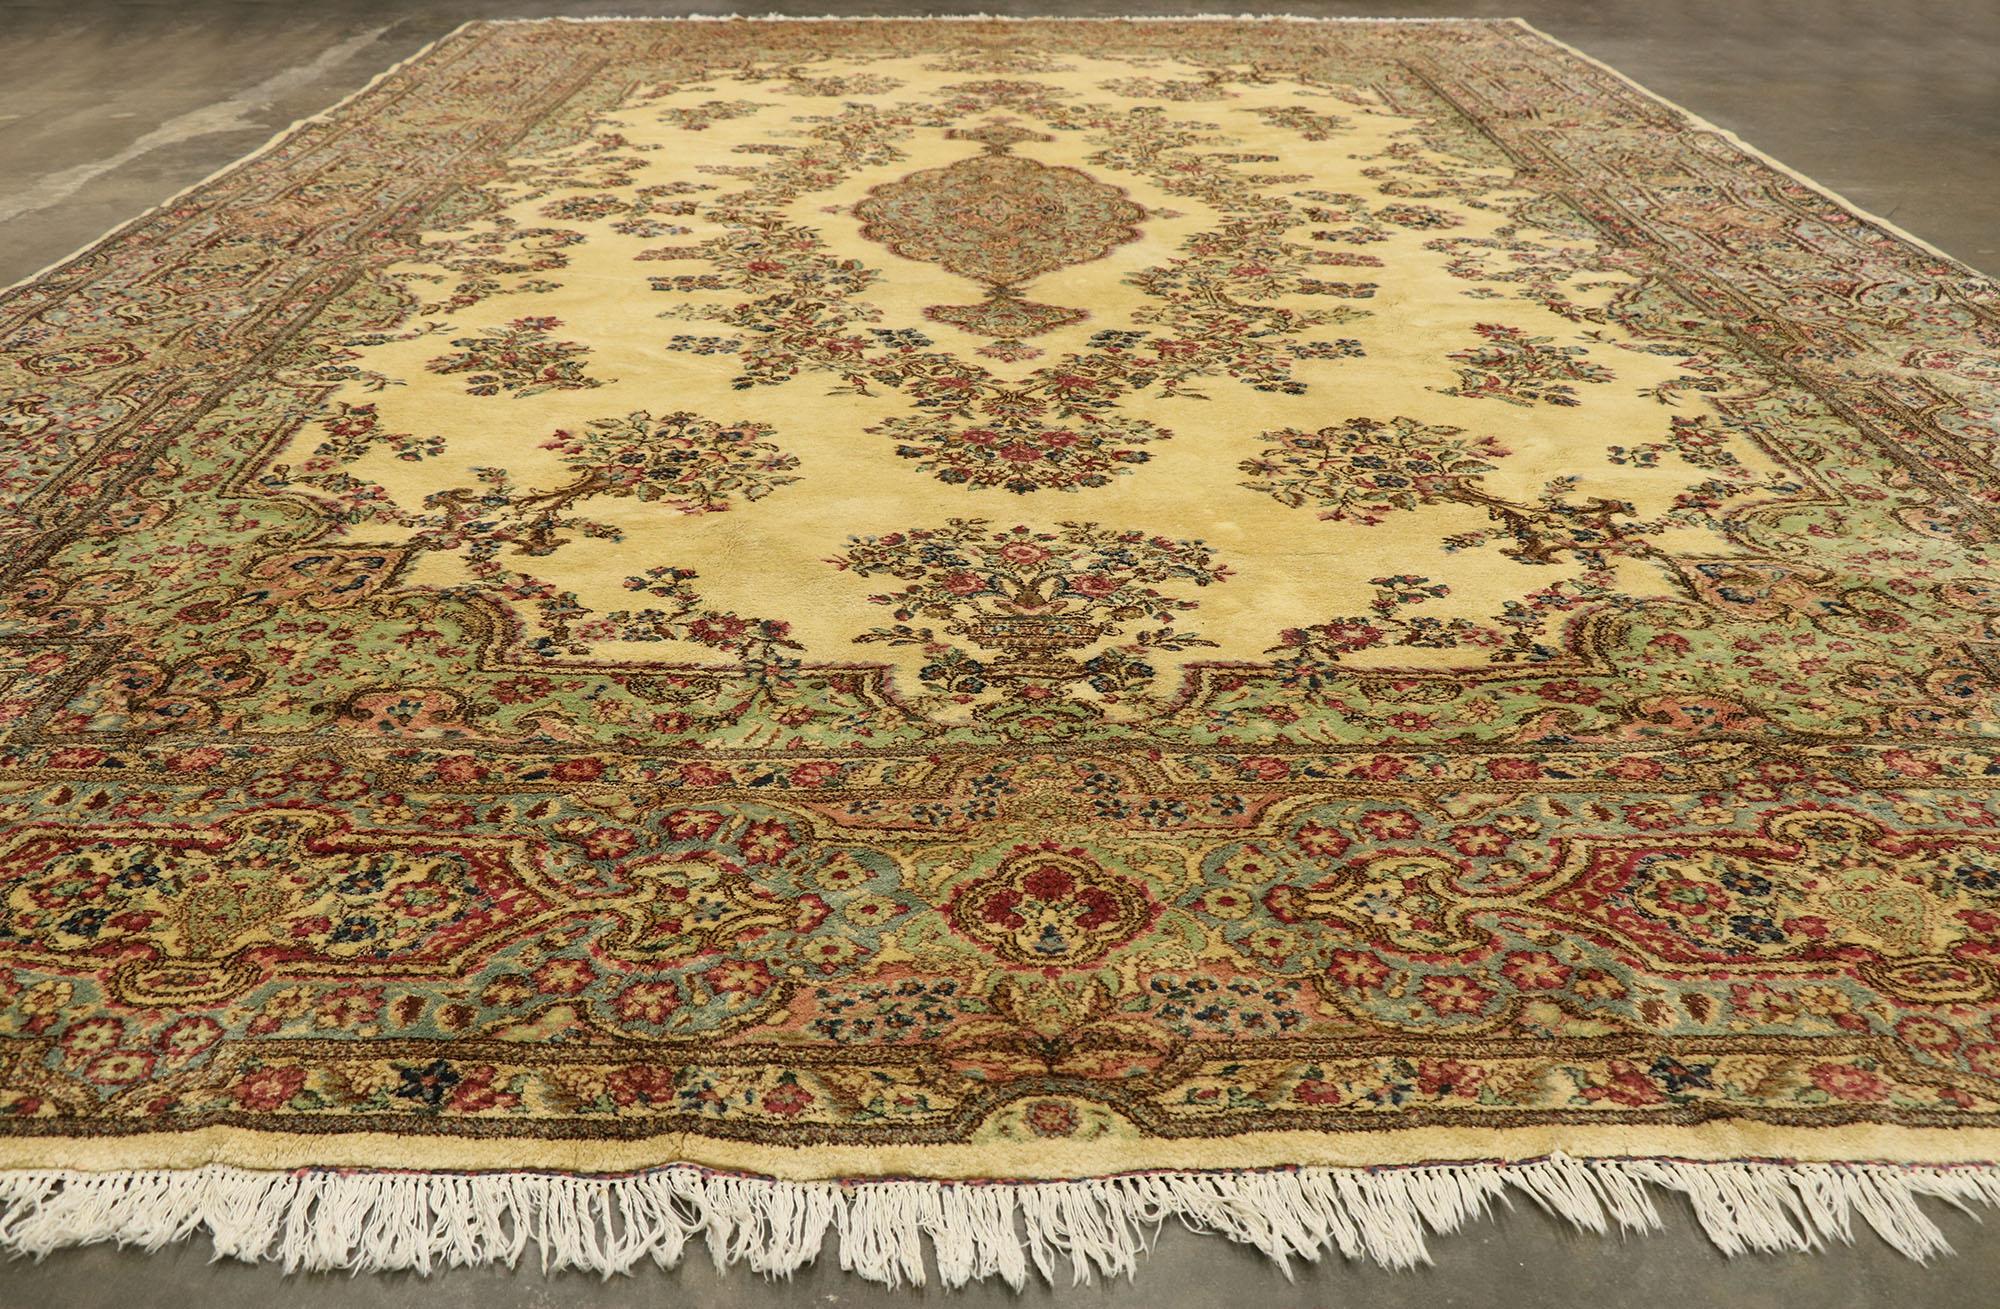 Oversized Antique Persian Kerman Rug with Romantic French Provincial Style For Sale 5